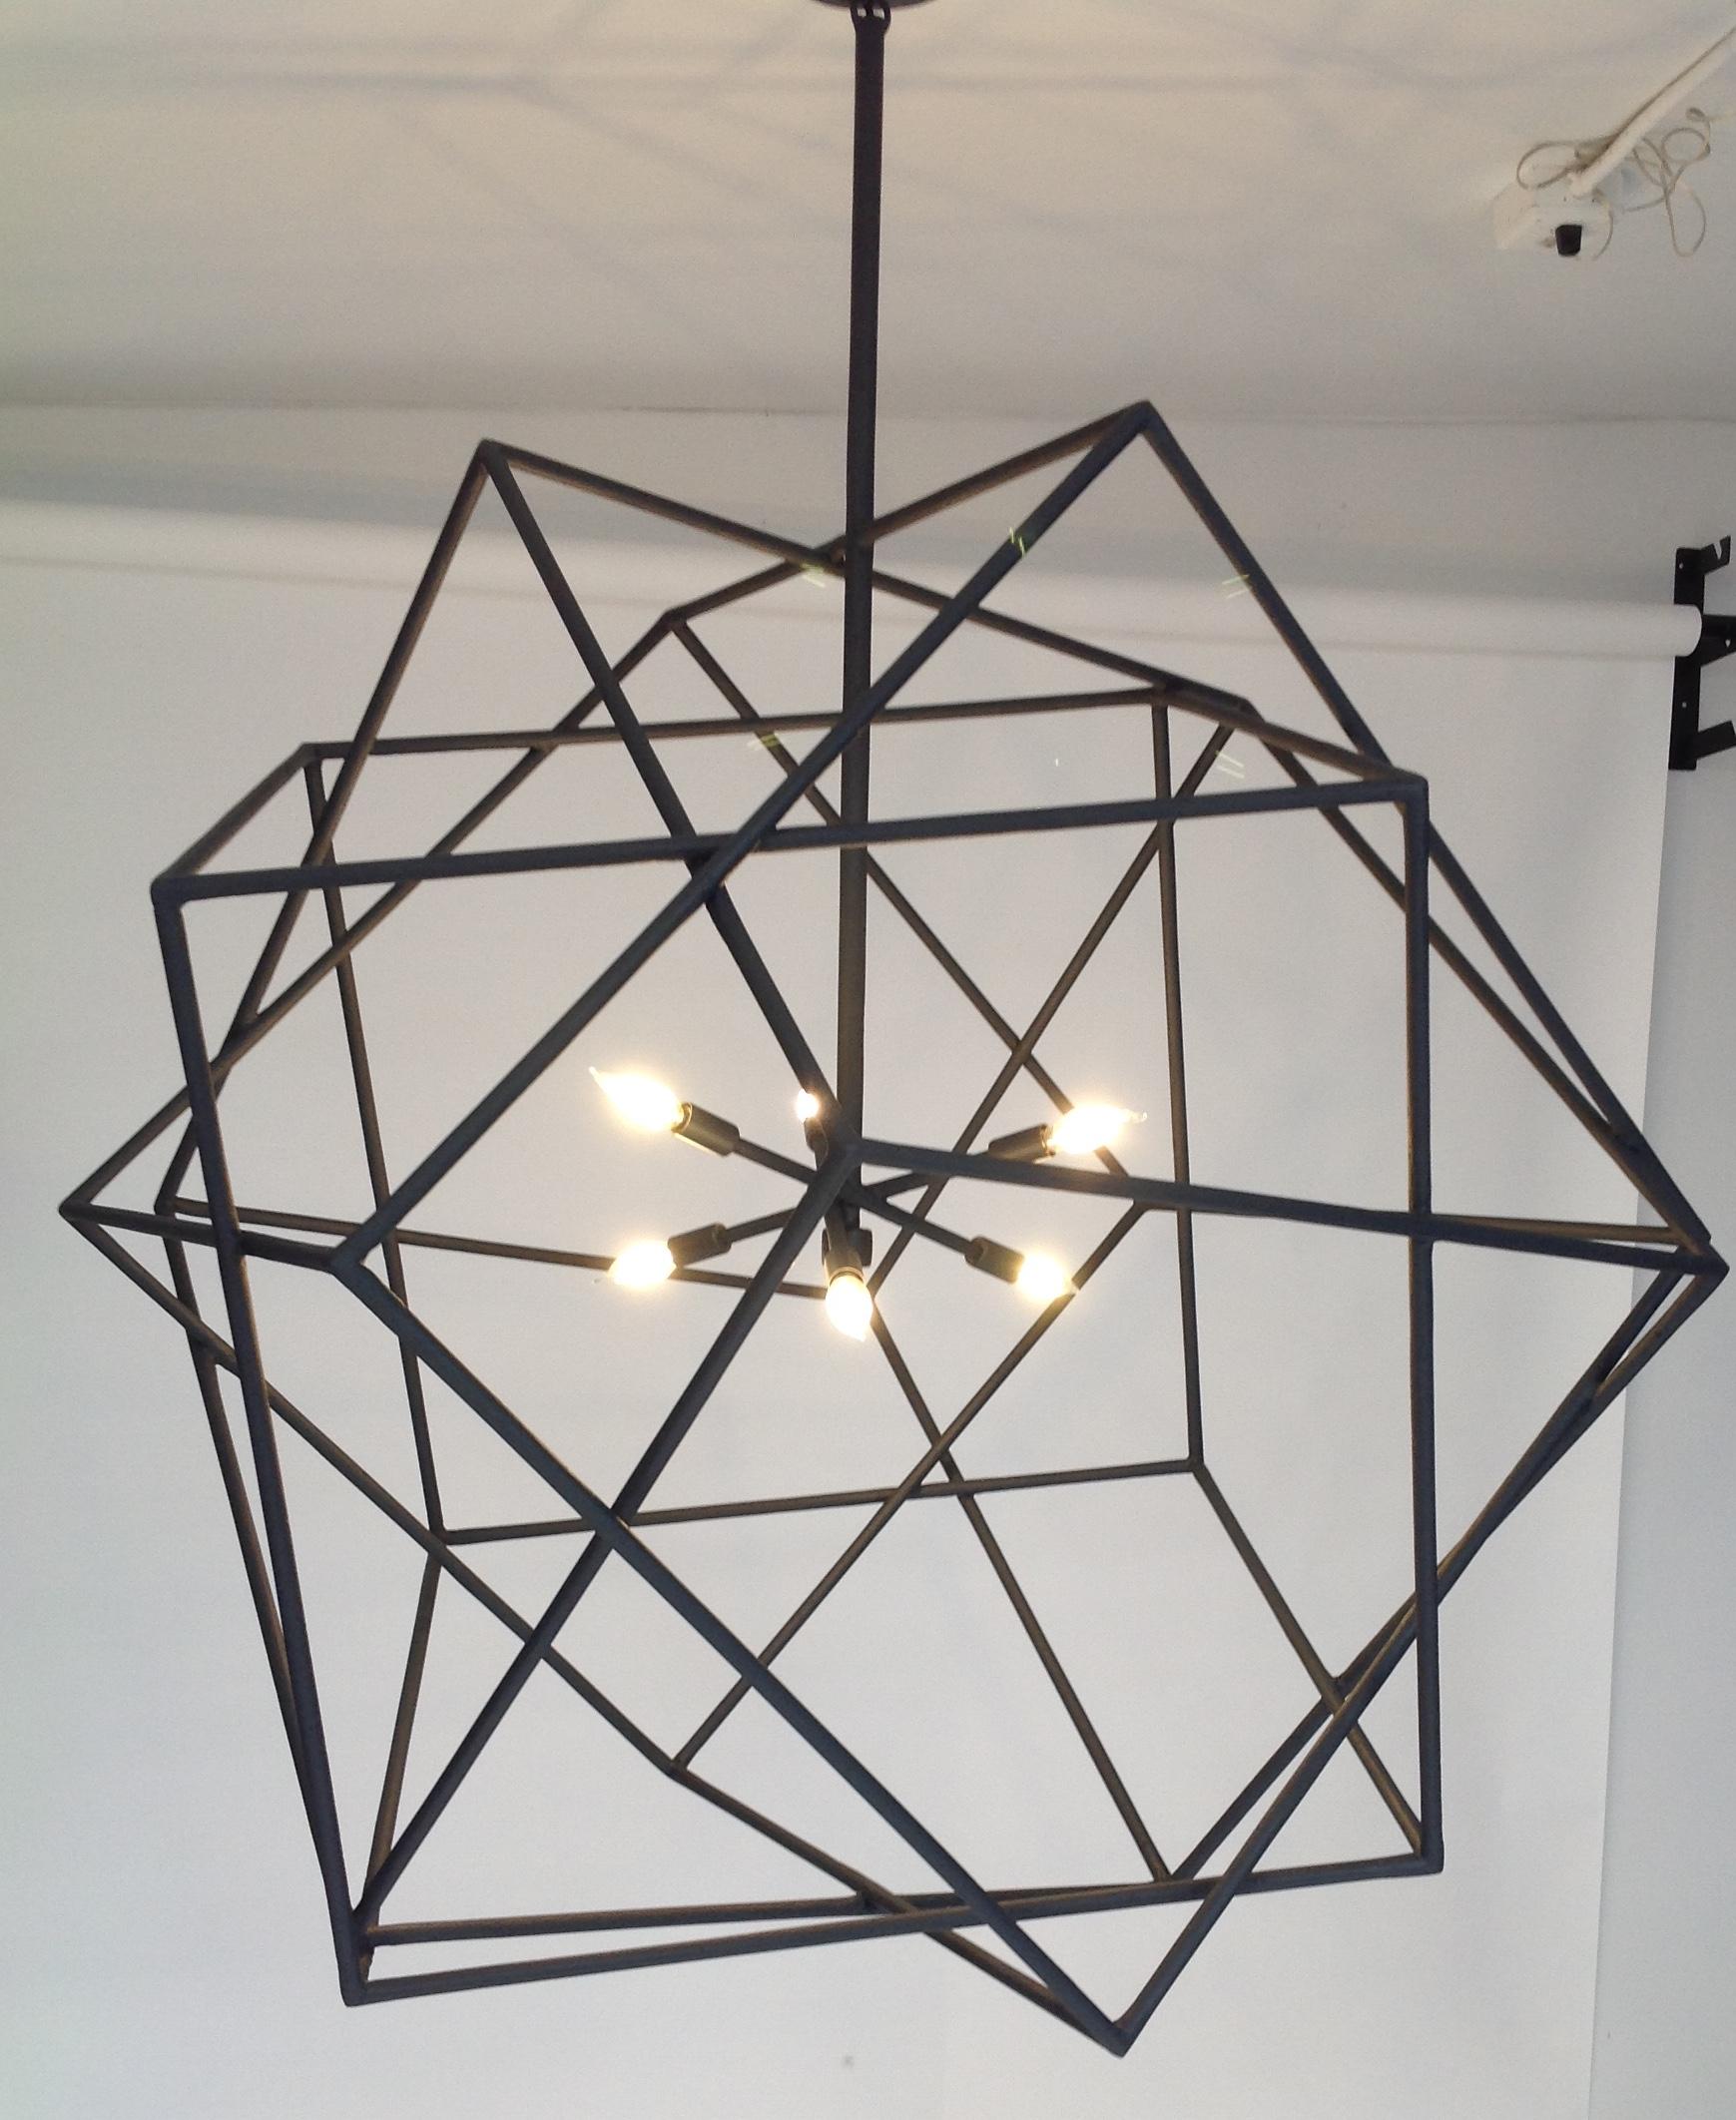 Louvre Chandelier by Bourgeois Boheme Atelier In Excellent Condition For Sale In Los Angeles, CA